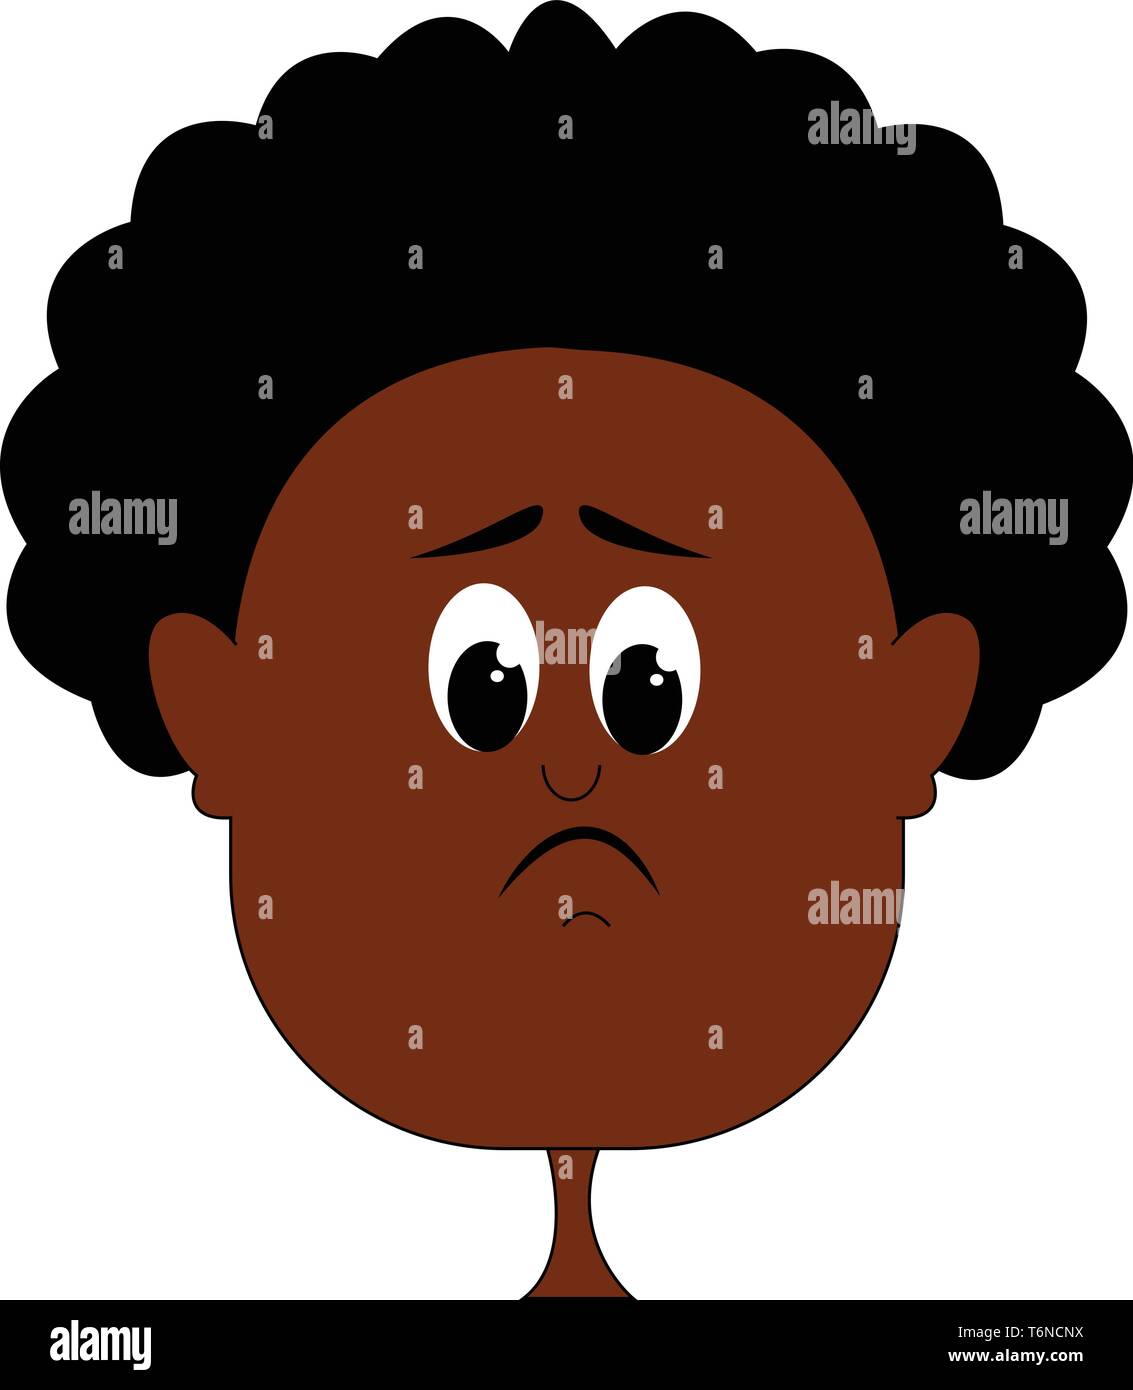 Kid Coloring Book Character Curly Hair Stock Vector (Royalty Free